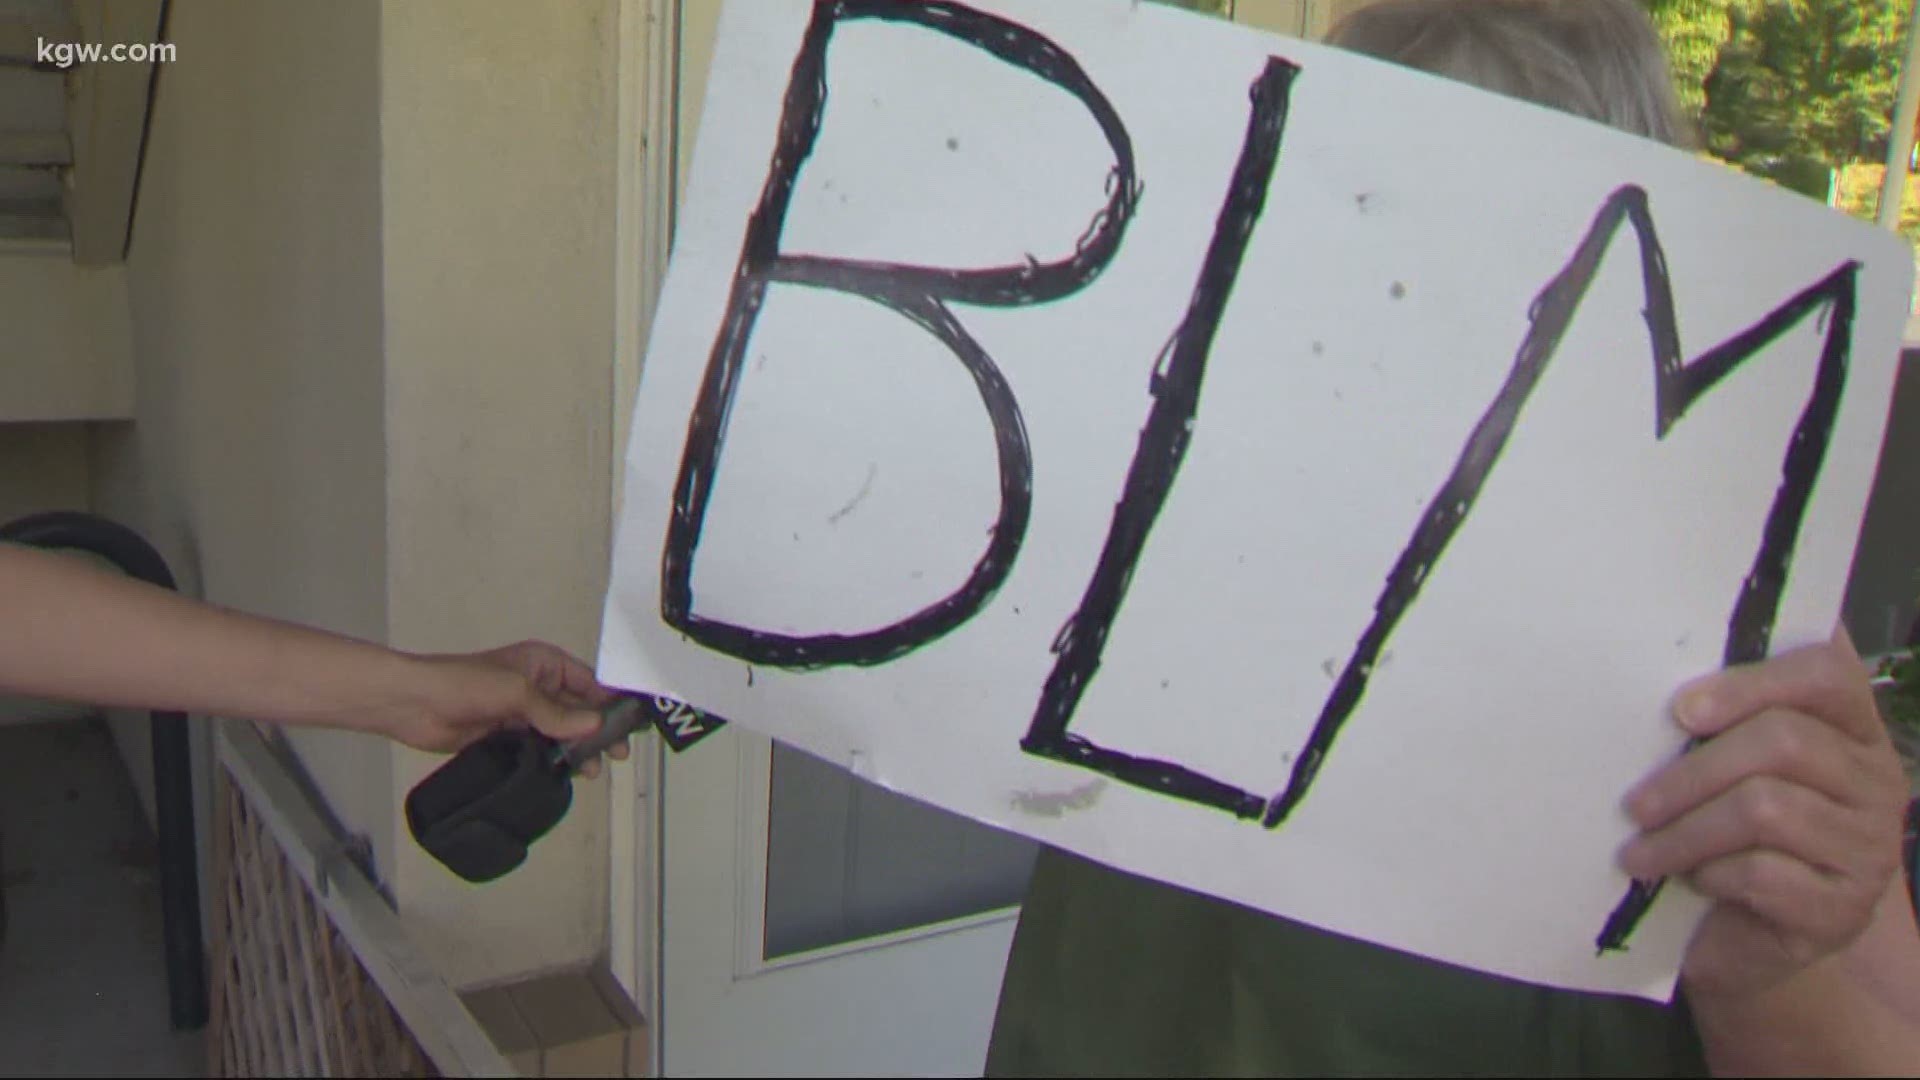 On the second night of vandalism outside the Portland Police Bureau’s East Precinct, two neighbors stood up against protesters responsible for the destruction.